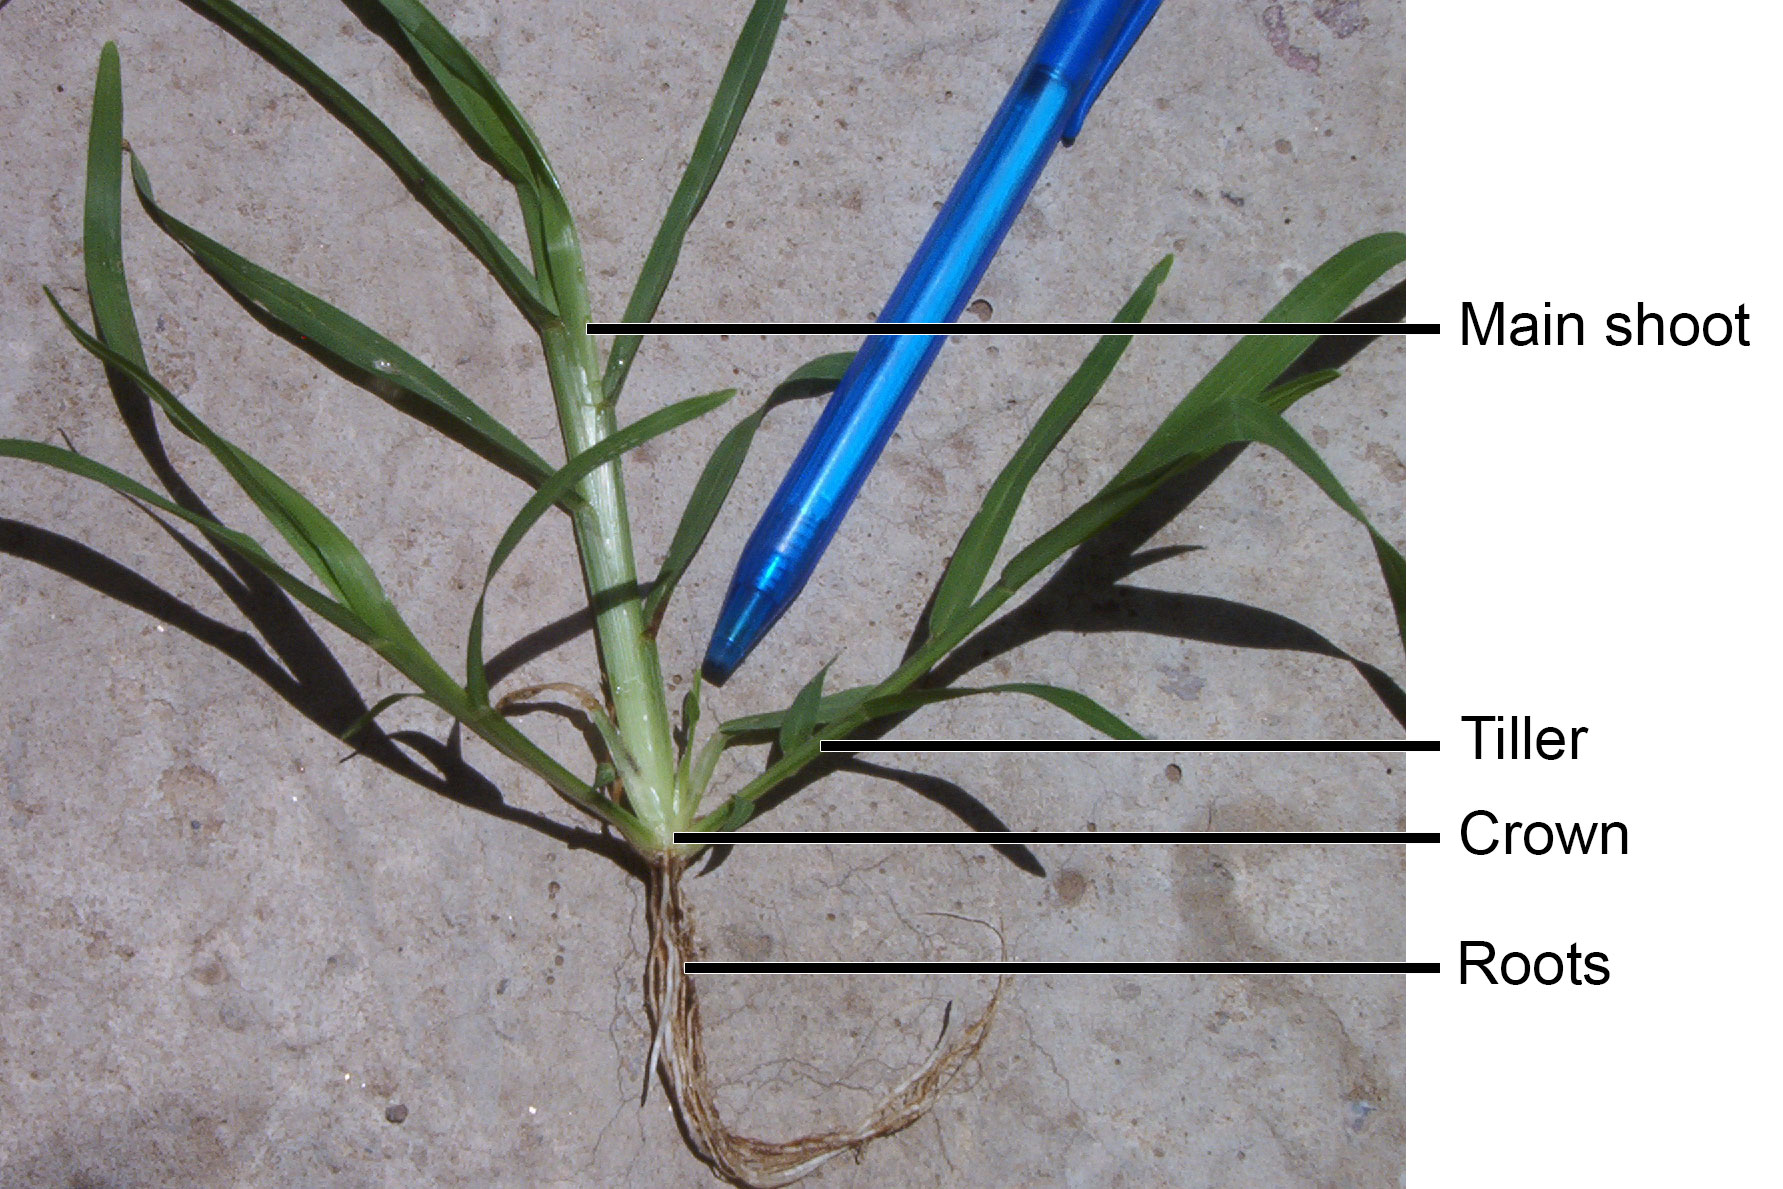 Photograph of the base of a grass plant with labels showing the parts. From top to bottom, these are the main shoot, a tiller, the crown, and the roots. A pen is in the image pointing a structure on the grass, maybe a small tiller.